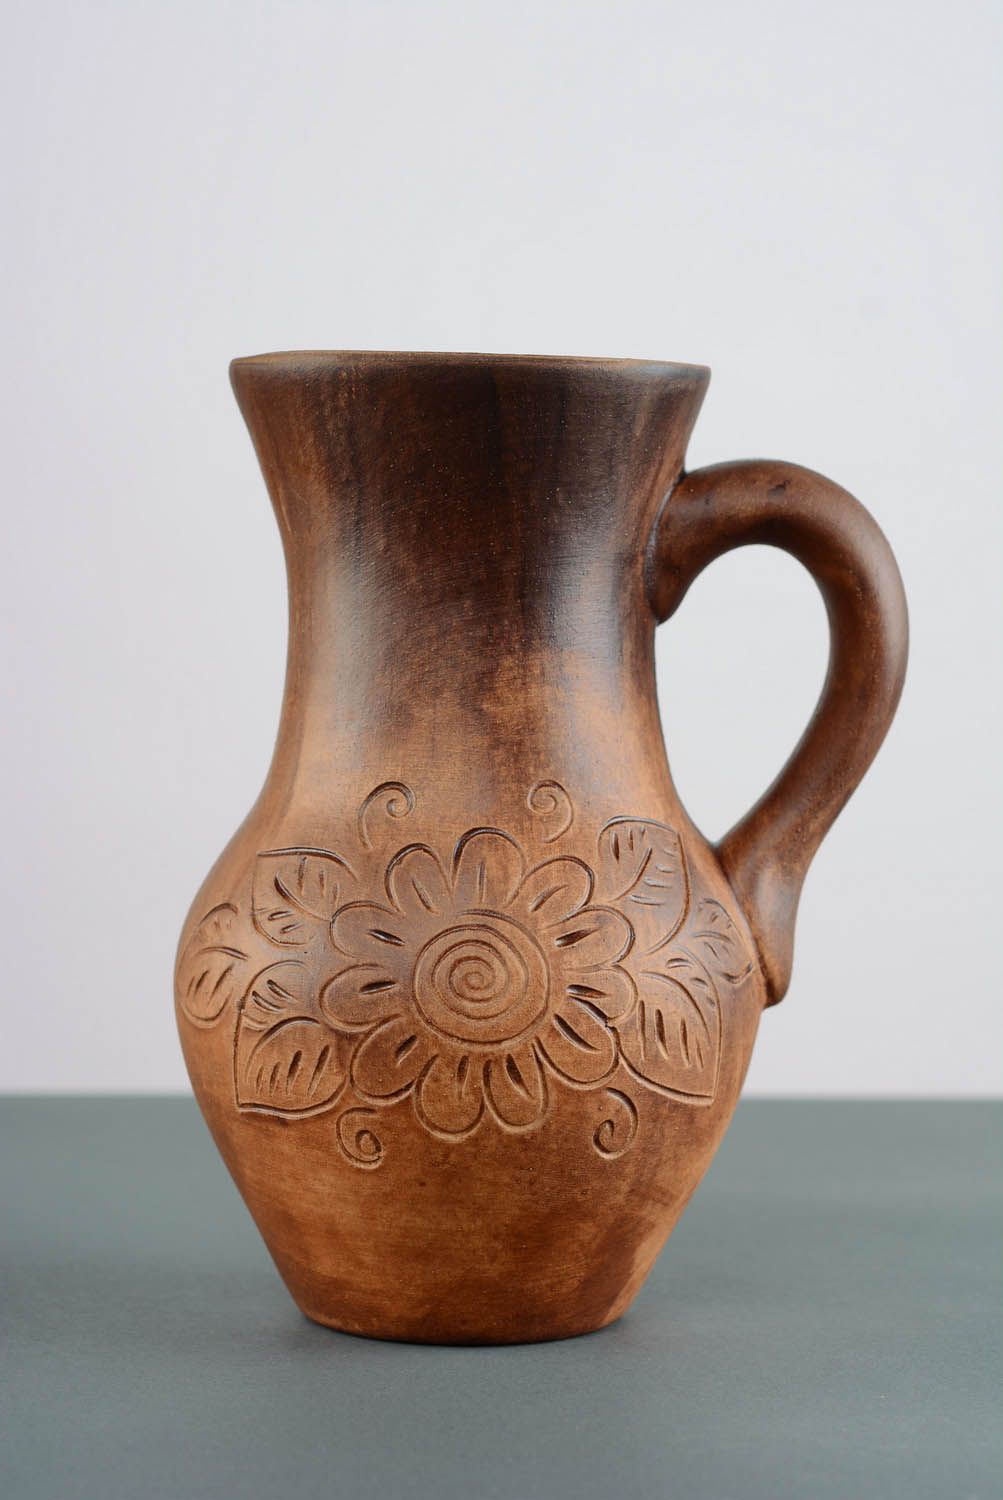 45 oz ceramic handmade pitcher with floral pattern in brown color 1,7 lb photo 3